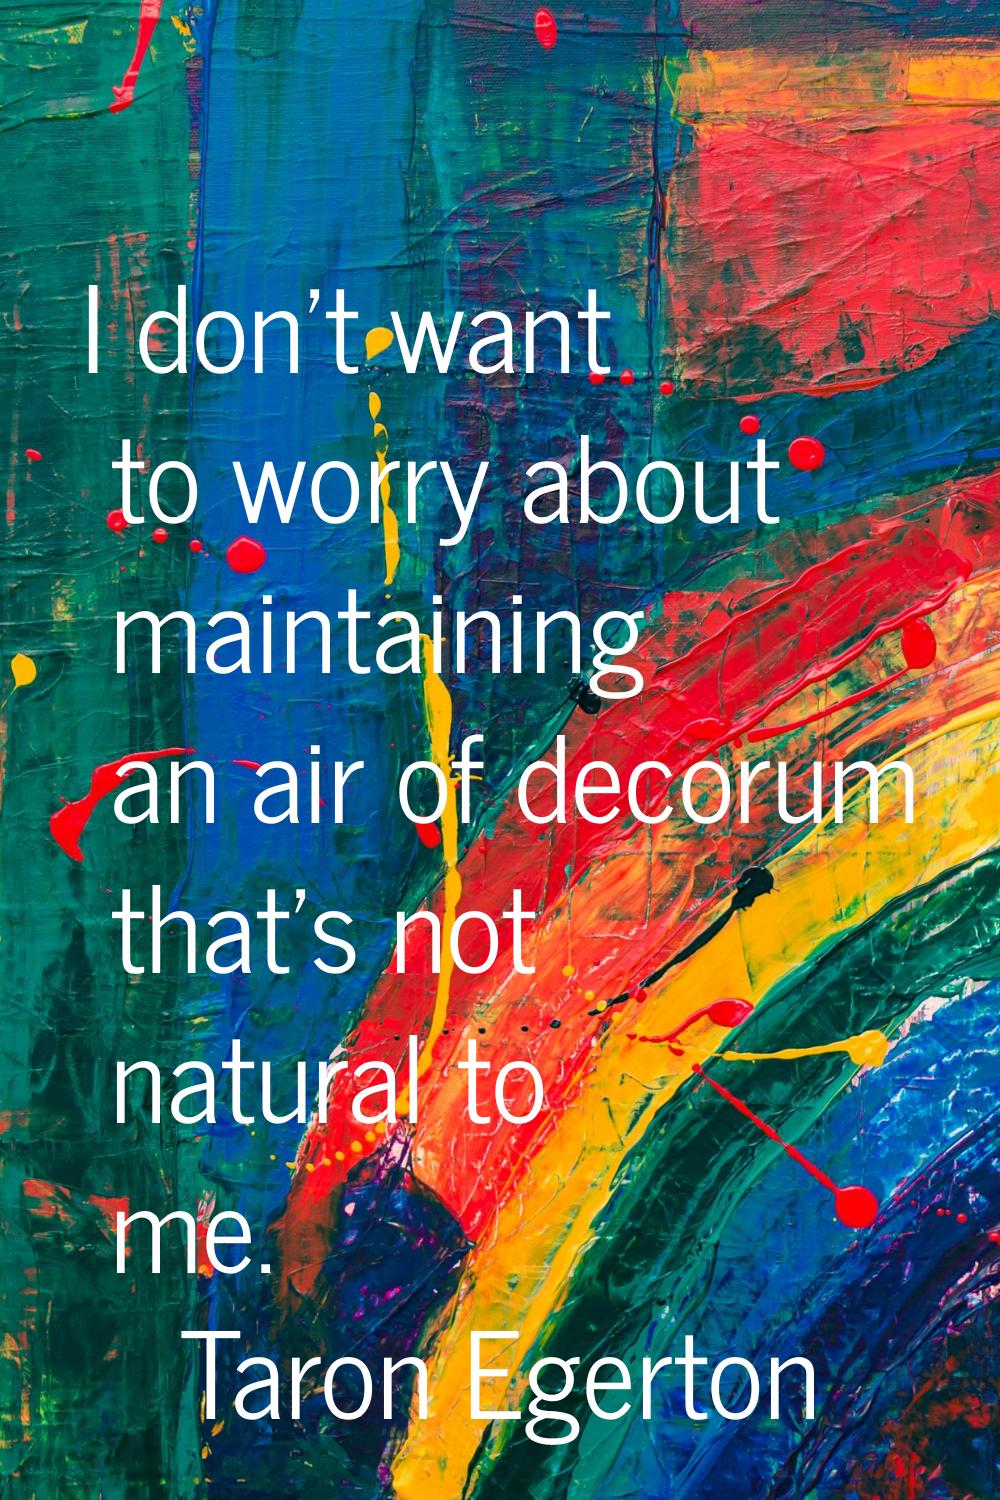 I don't want to worry about maintaining an air of decorum that's not natural to me.